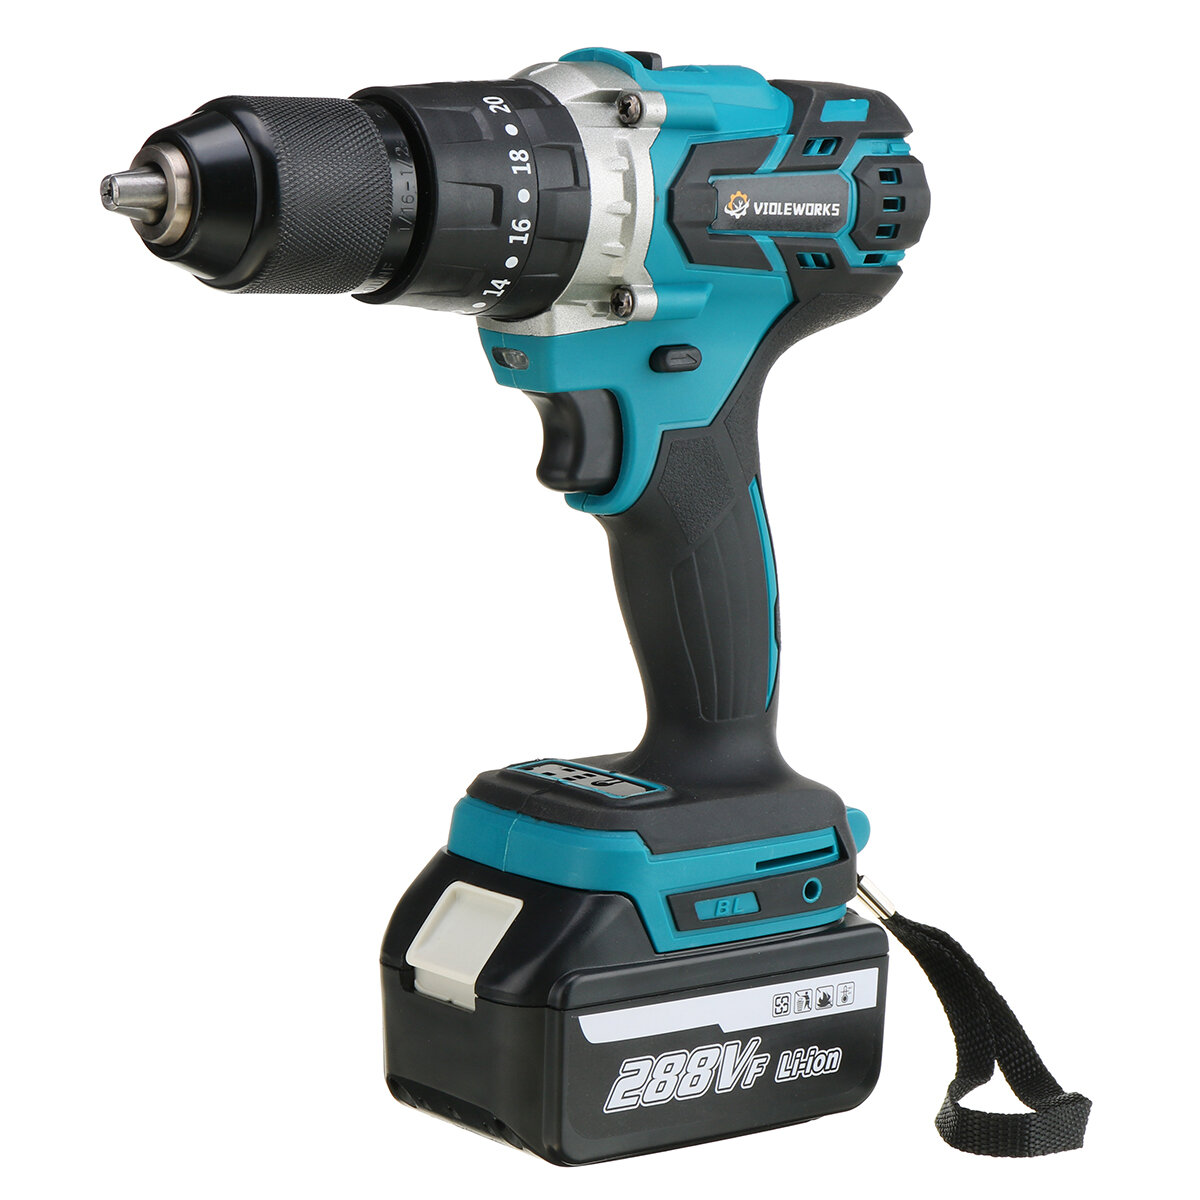 VIOLEWORKS 288VF 3 In 1 Cordless Electric Impact Drill Driver Brushless Driver...